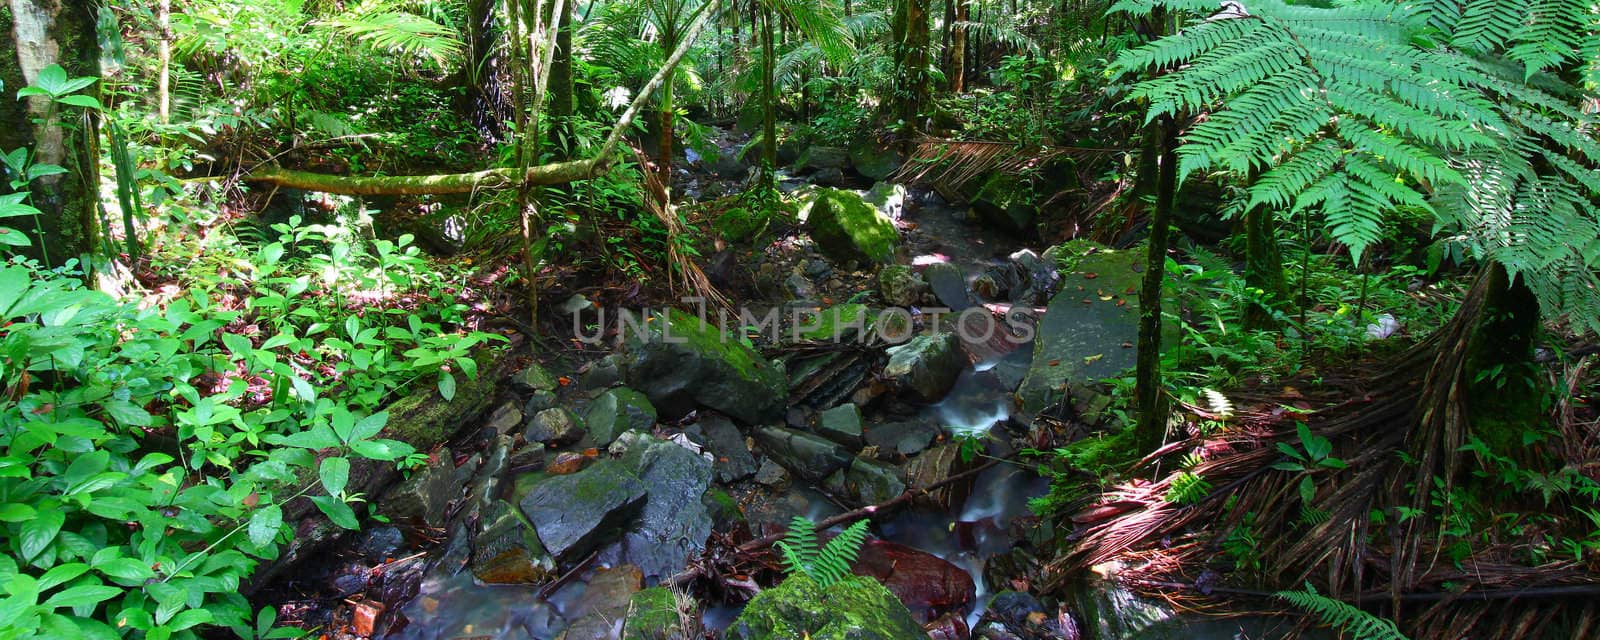 El Yunque National Forest by Wirepec